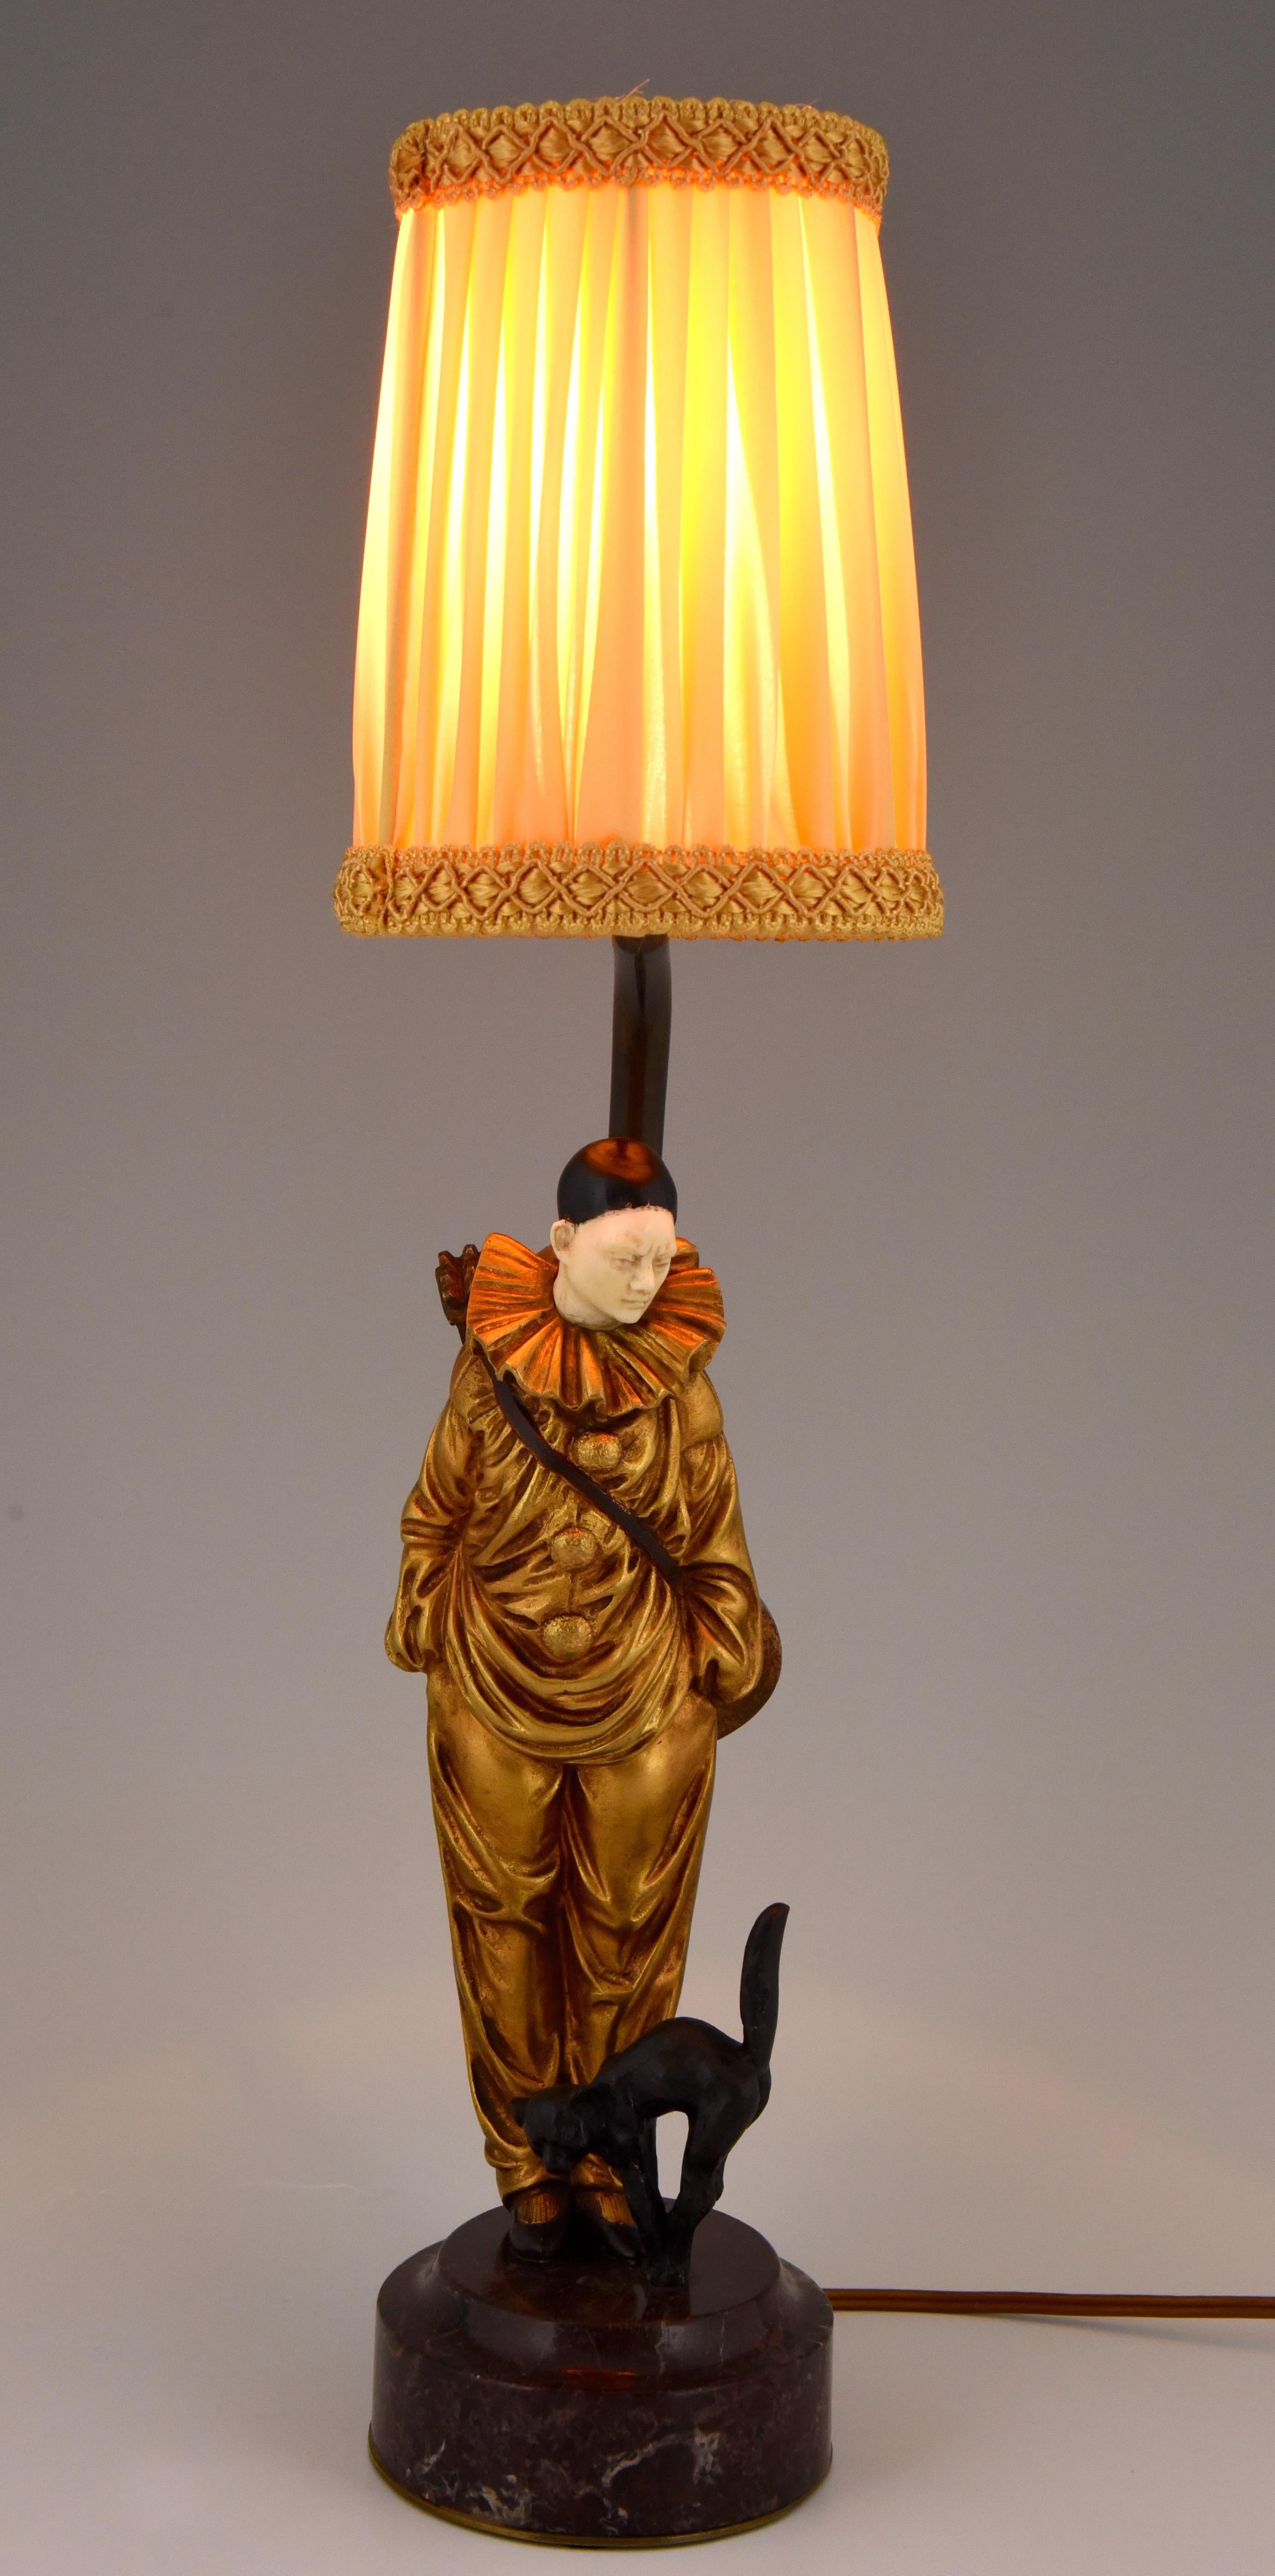 Cute bronze table lamp with a sculpture of a Pierrot clown and his cat. The lamp is signed by Georges Omerth and has a lovely gilt patina, France 1925. The lampshade is in fabric and gives a warm ambient light.
This bronze is illustrated in:?
